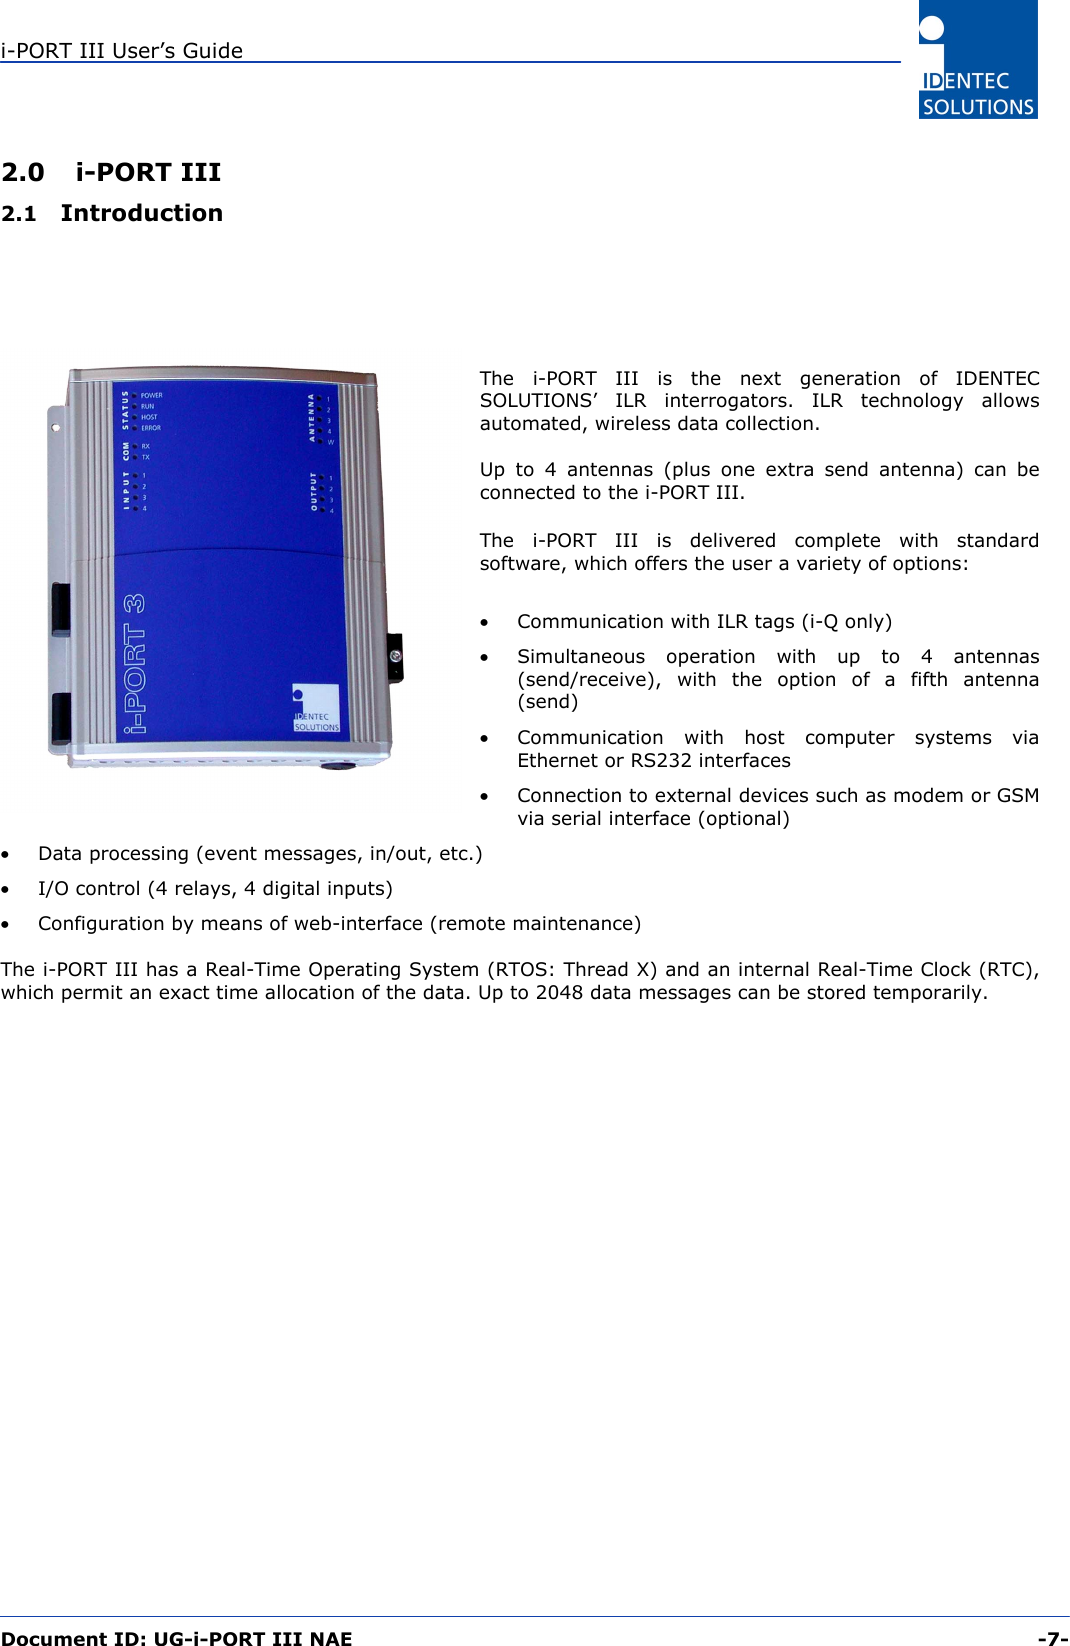 i-PORT III User’s Guide  Document ID: UG-i-PORT III NAE     -7-  2.0 i-PORT III 2.1  Introduction      The i-PORT III is the next generation of IDENTEC SOLUTIONS’ ILR interrogators. ILR technology allows automated, wireless data collection.  Up to 4 antennas (plus one extra send antenna) can be connected to the i-PORT III.  The i-PORT III is delivered complete with standard software, which offers the user a variety of options:  •  Communication with ILR tags (i-Q only) •  Simultaneous operation with up to 4 antennas (send/receive), with the option of a fifth antenna (send) •  Communication with host computer systems via Ethernet or RS232 interfaces  •  Connection to external devices such as modem or GSM via serial interface (optional) •  Data processing (event messages, in/out, etc.) •  I/O control (4 relays, 4 digital inputs) •  Configuration by means of web-interface (remote maintenance)  The i-PORT III has a Real-Time Operating System (RTOS: Thread X) and an internal Real-Time Clock (RTC), which permit an exact time allocation of the data. Up to 2048 data messages can be stored temporarily.  